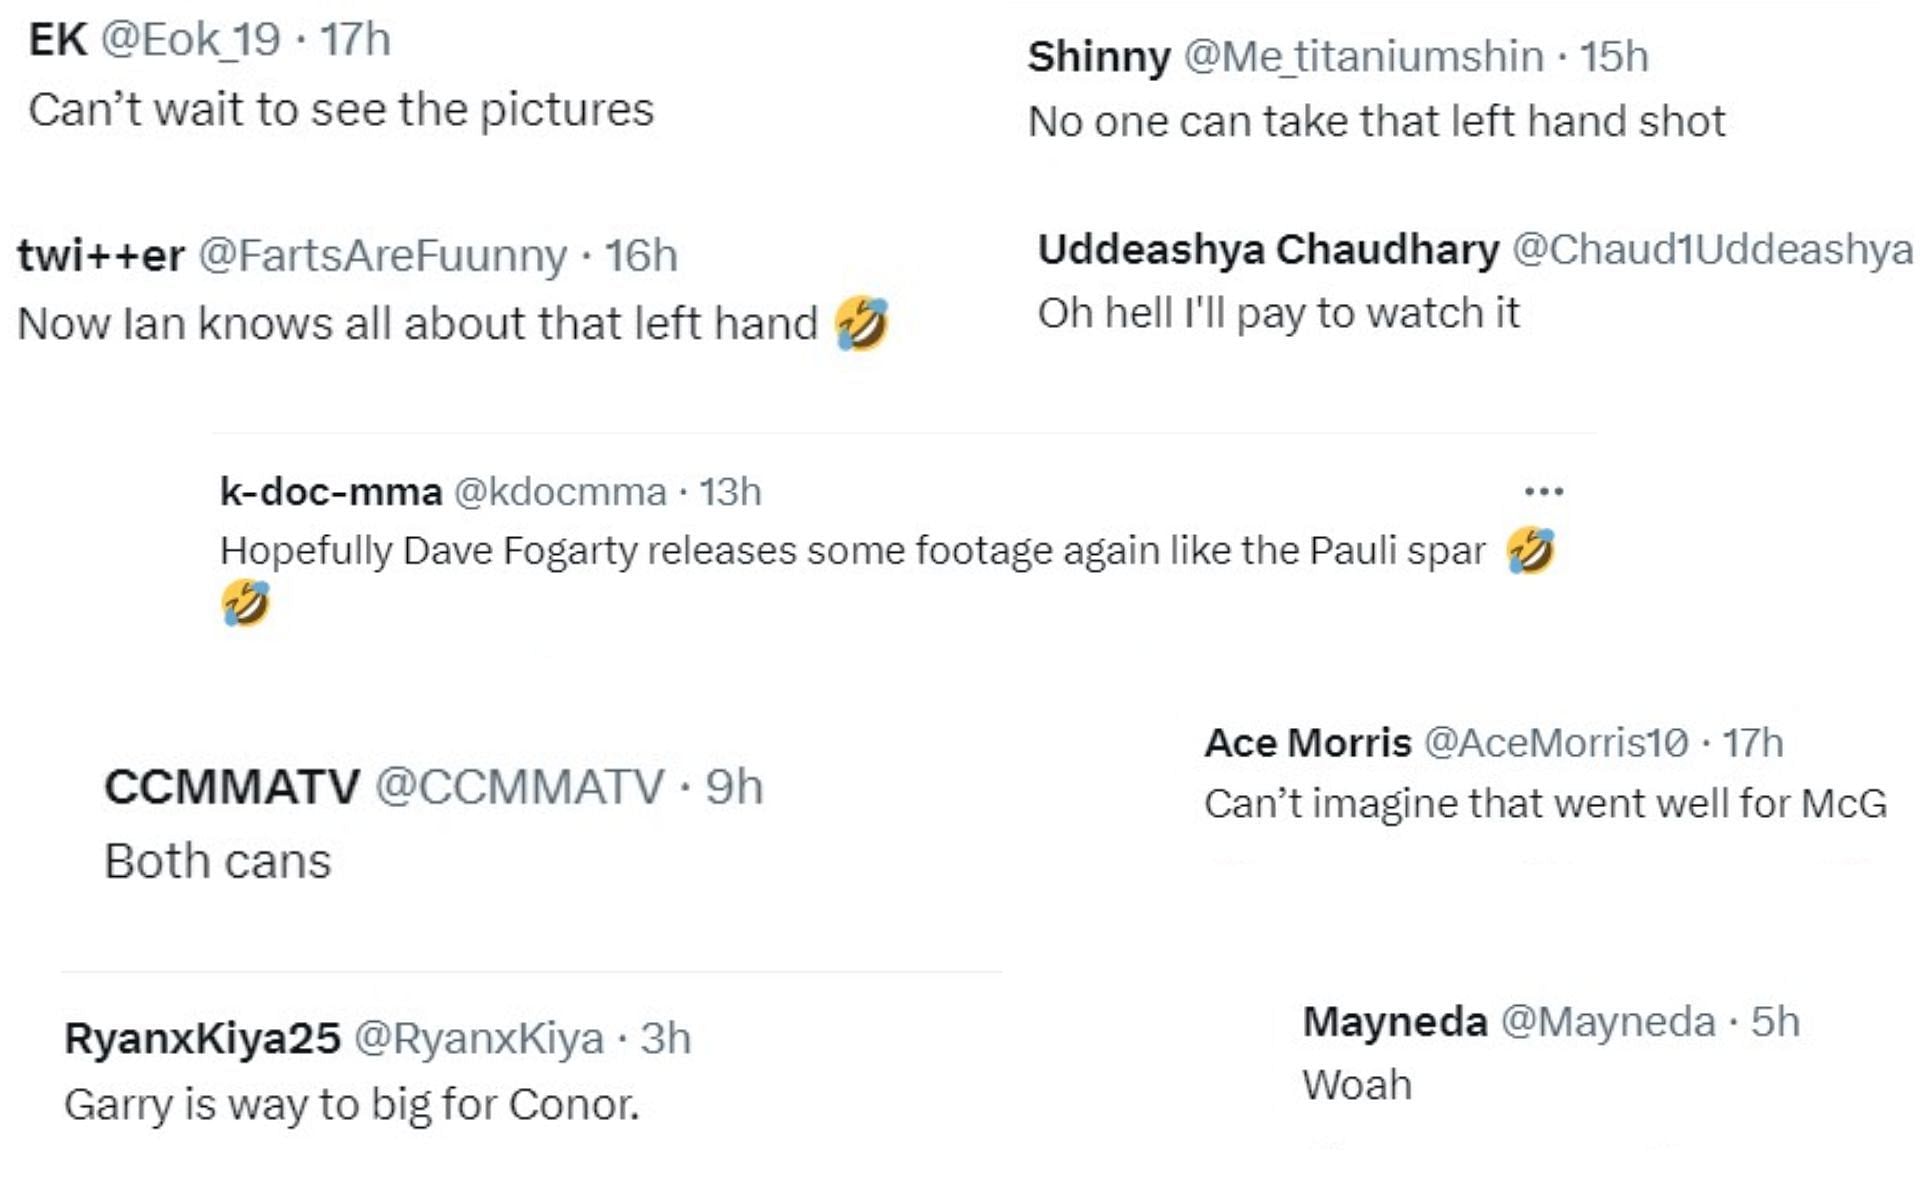 Screenshot of fan reactions to McGregor and Garry sparring